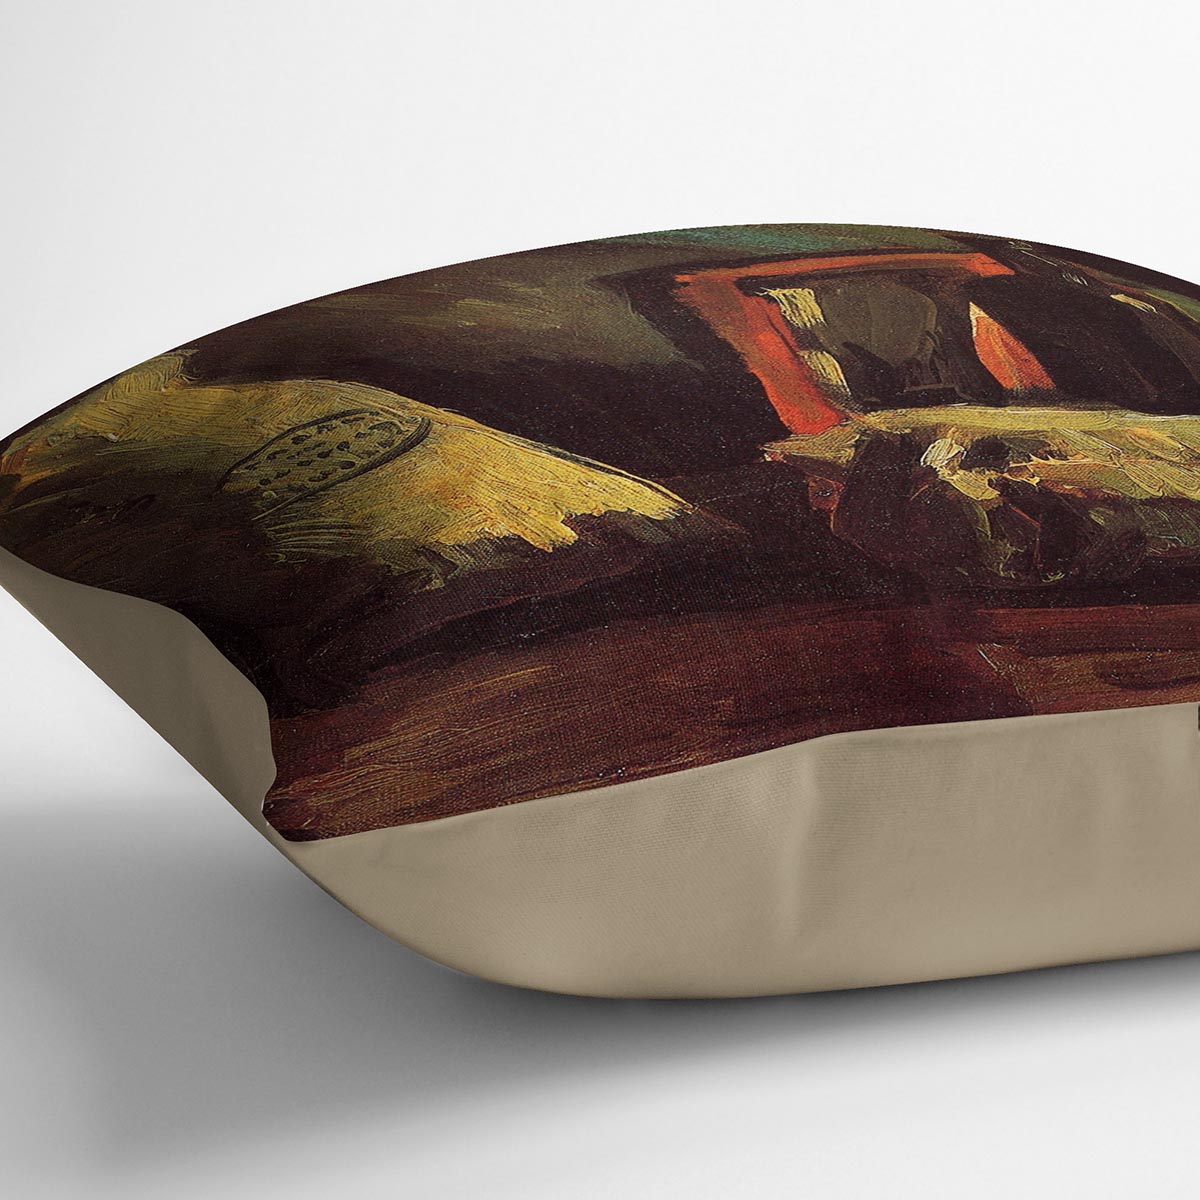 Still Life with Two Sacks and a Bottl by Van Gogh Cushion